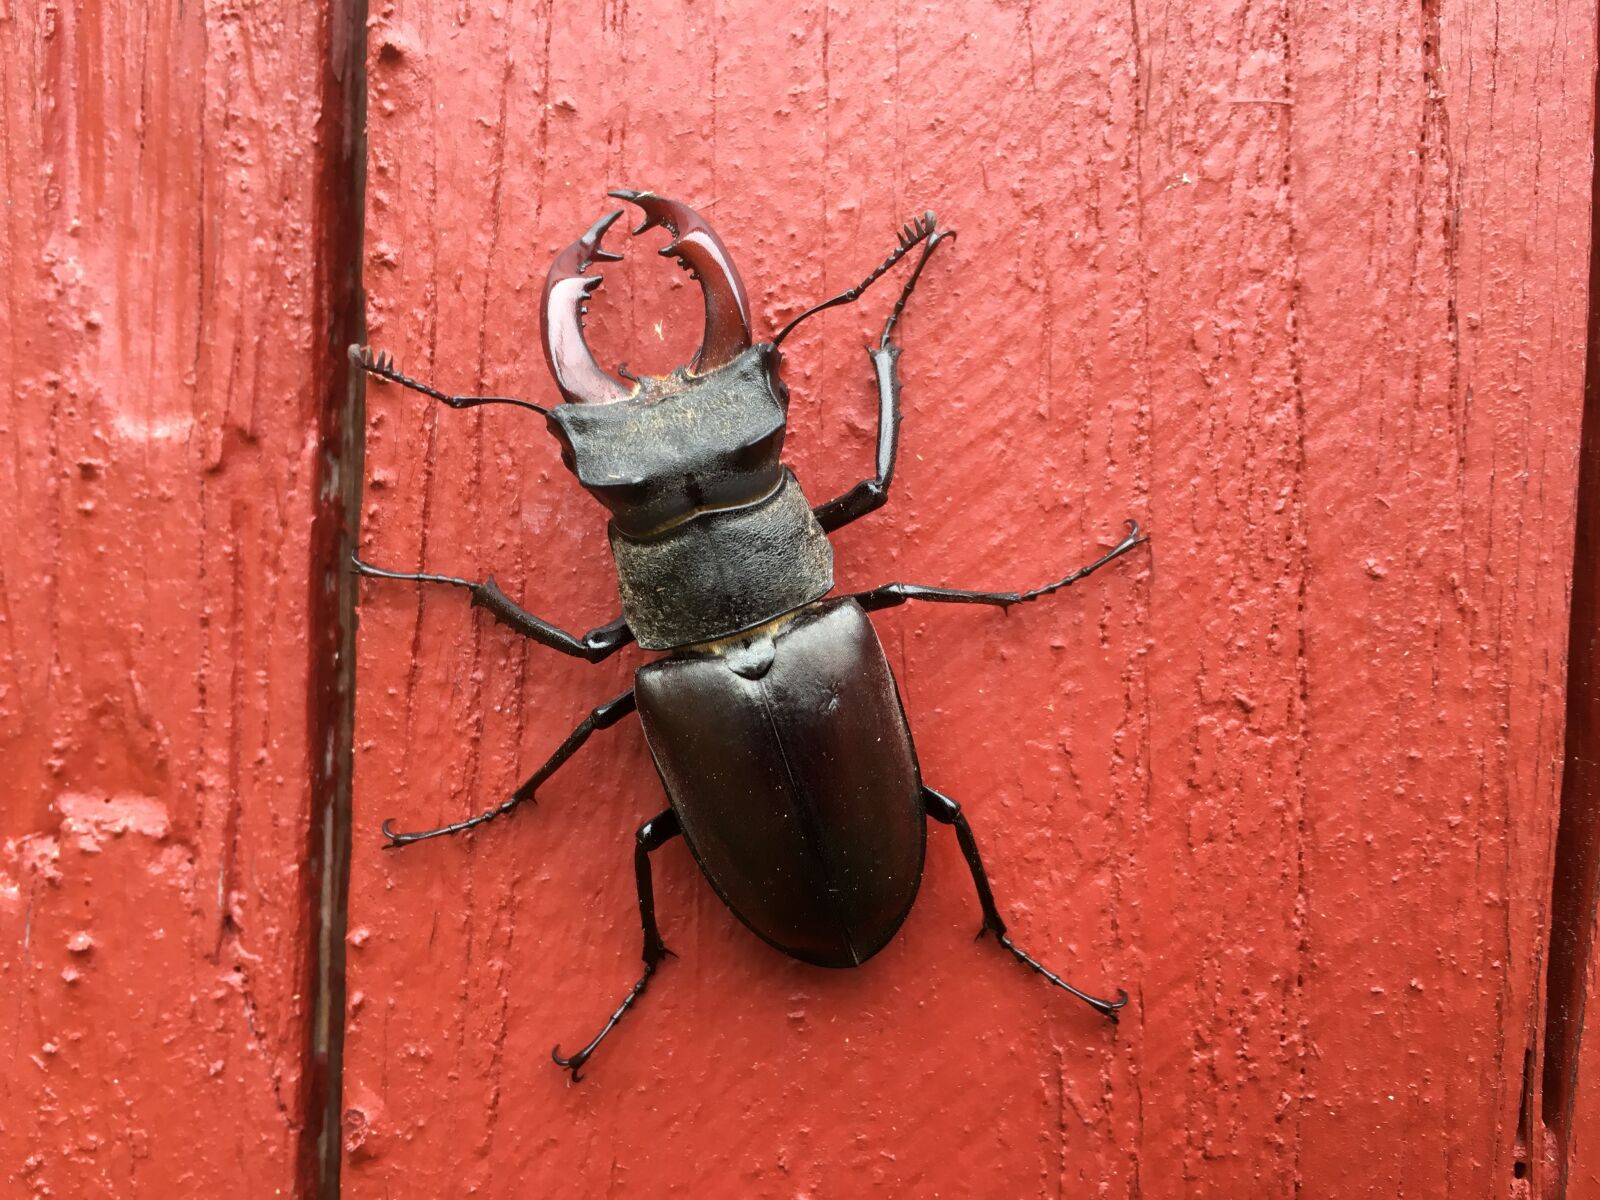 Apple iPhone 6s + iPhone 6s back camera 4.15mm f/2.2 sample photo. Stag beetle, insect, nature photography